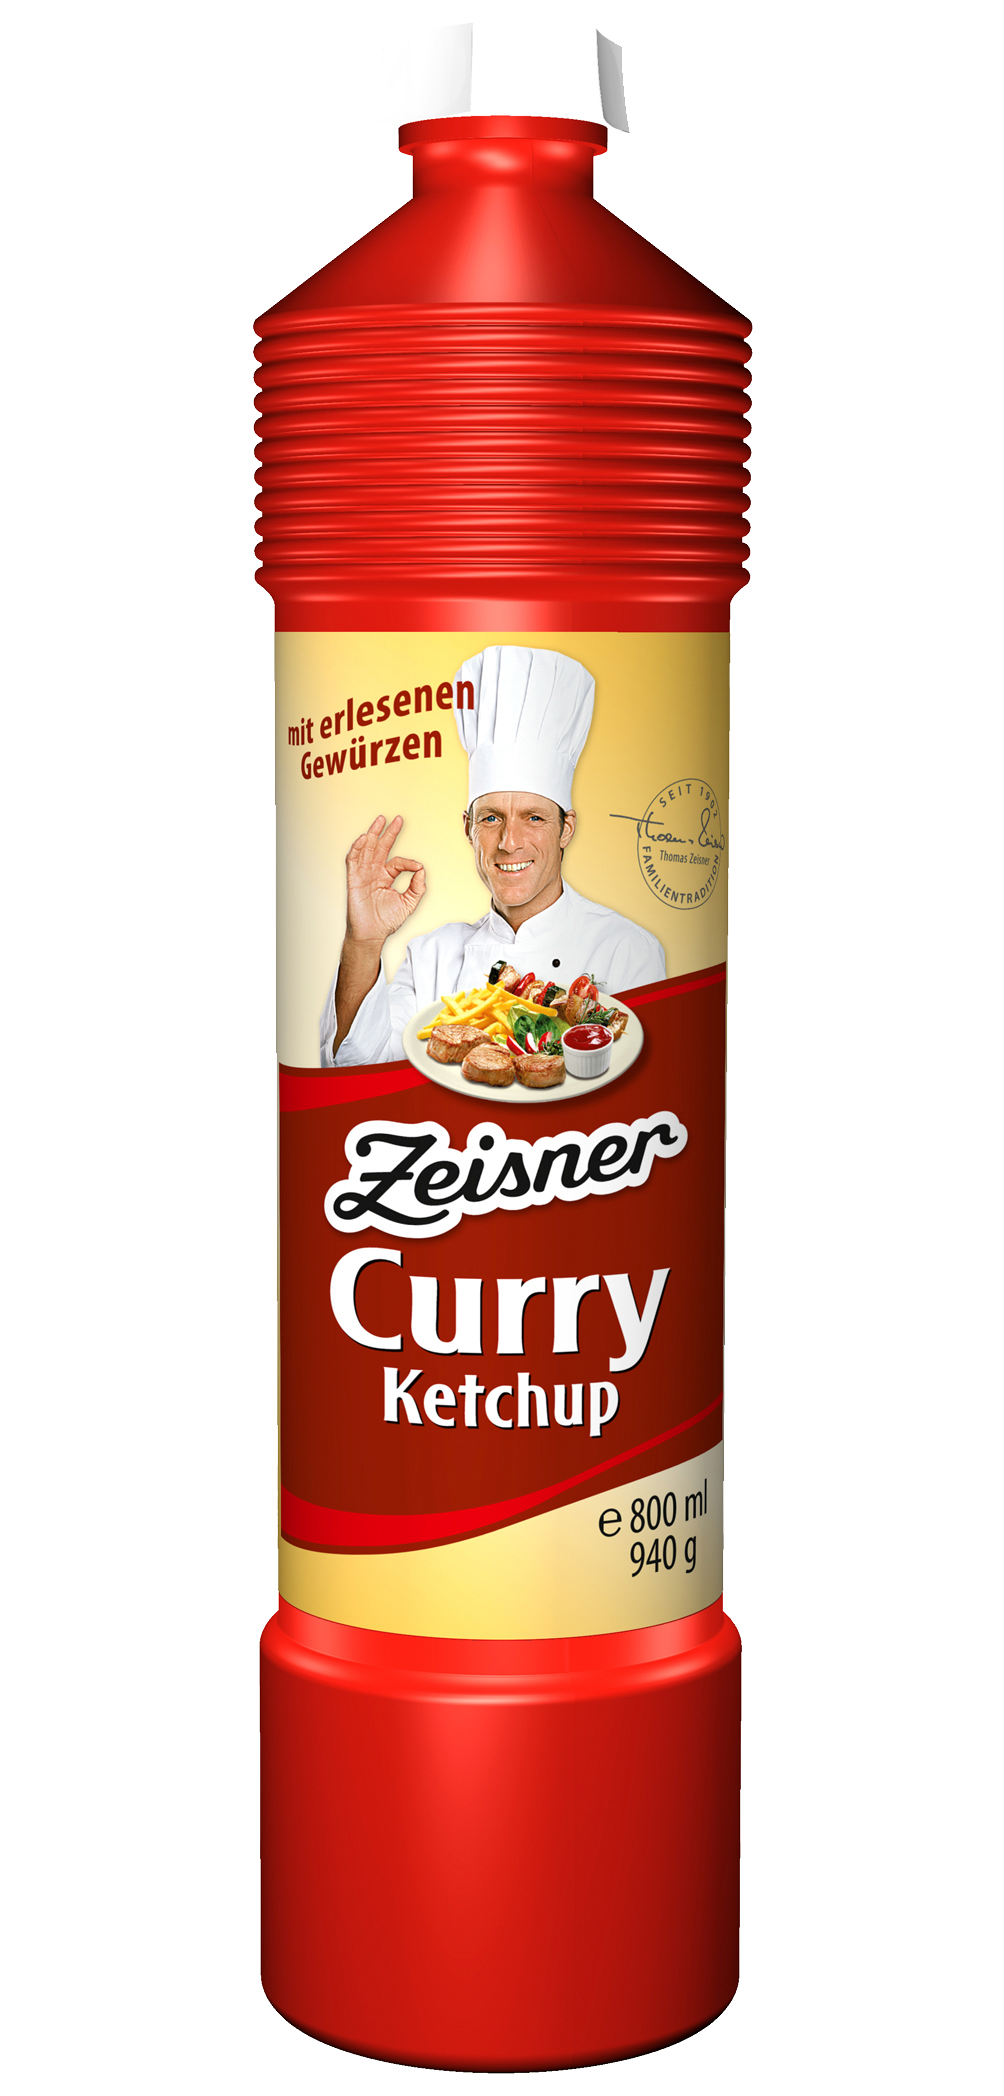 Curryketchup savico 960gr knijpfles